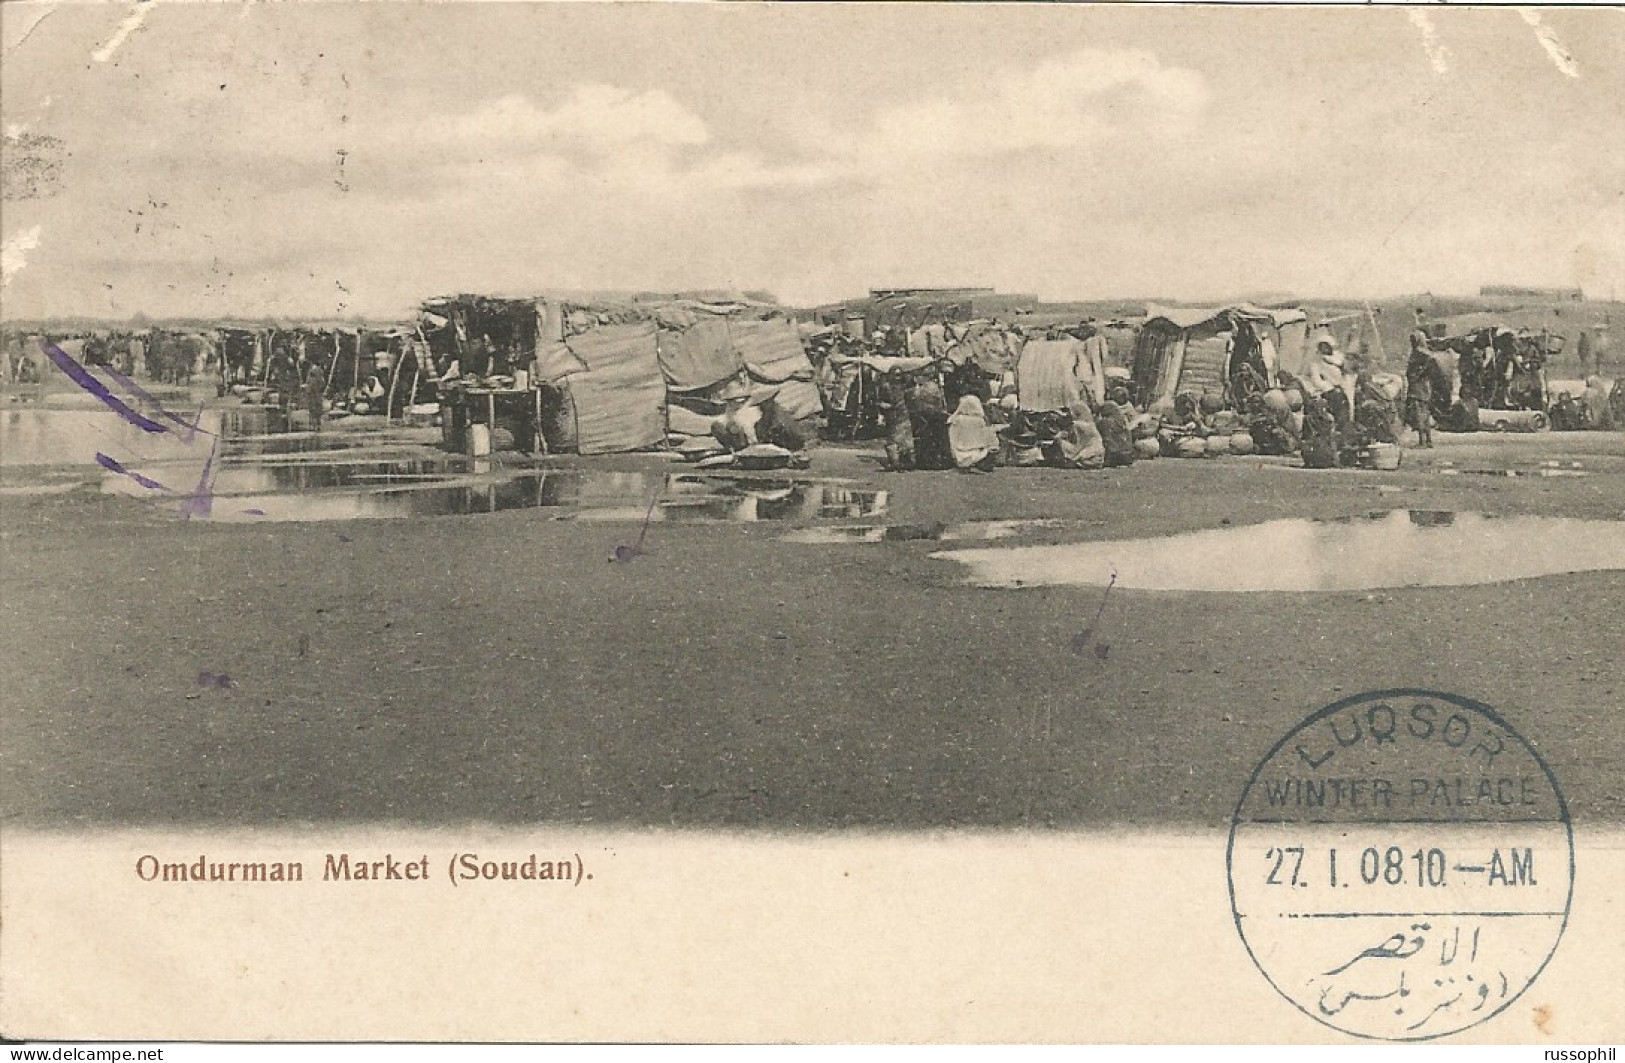 SUDAN - 1 MIL. FRANKING ON PC (VIEW OF OMDURMAN MARKET) TO THE POSTMASTER AT THE WINTER PALACE IN LUQSOR - 1908 - Sudan (...-1951)